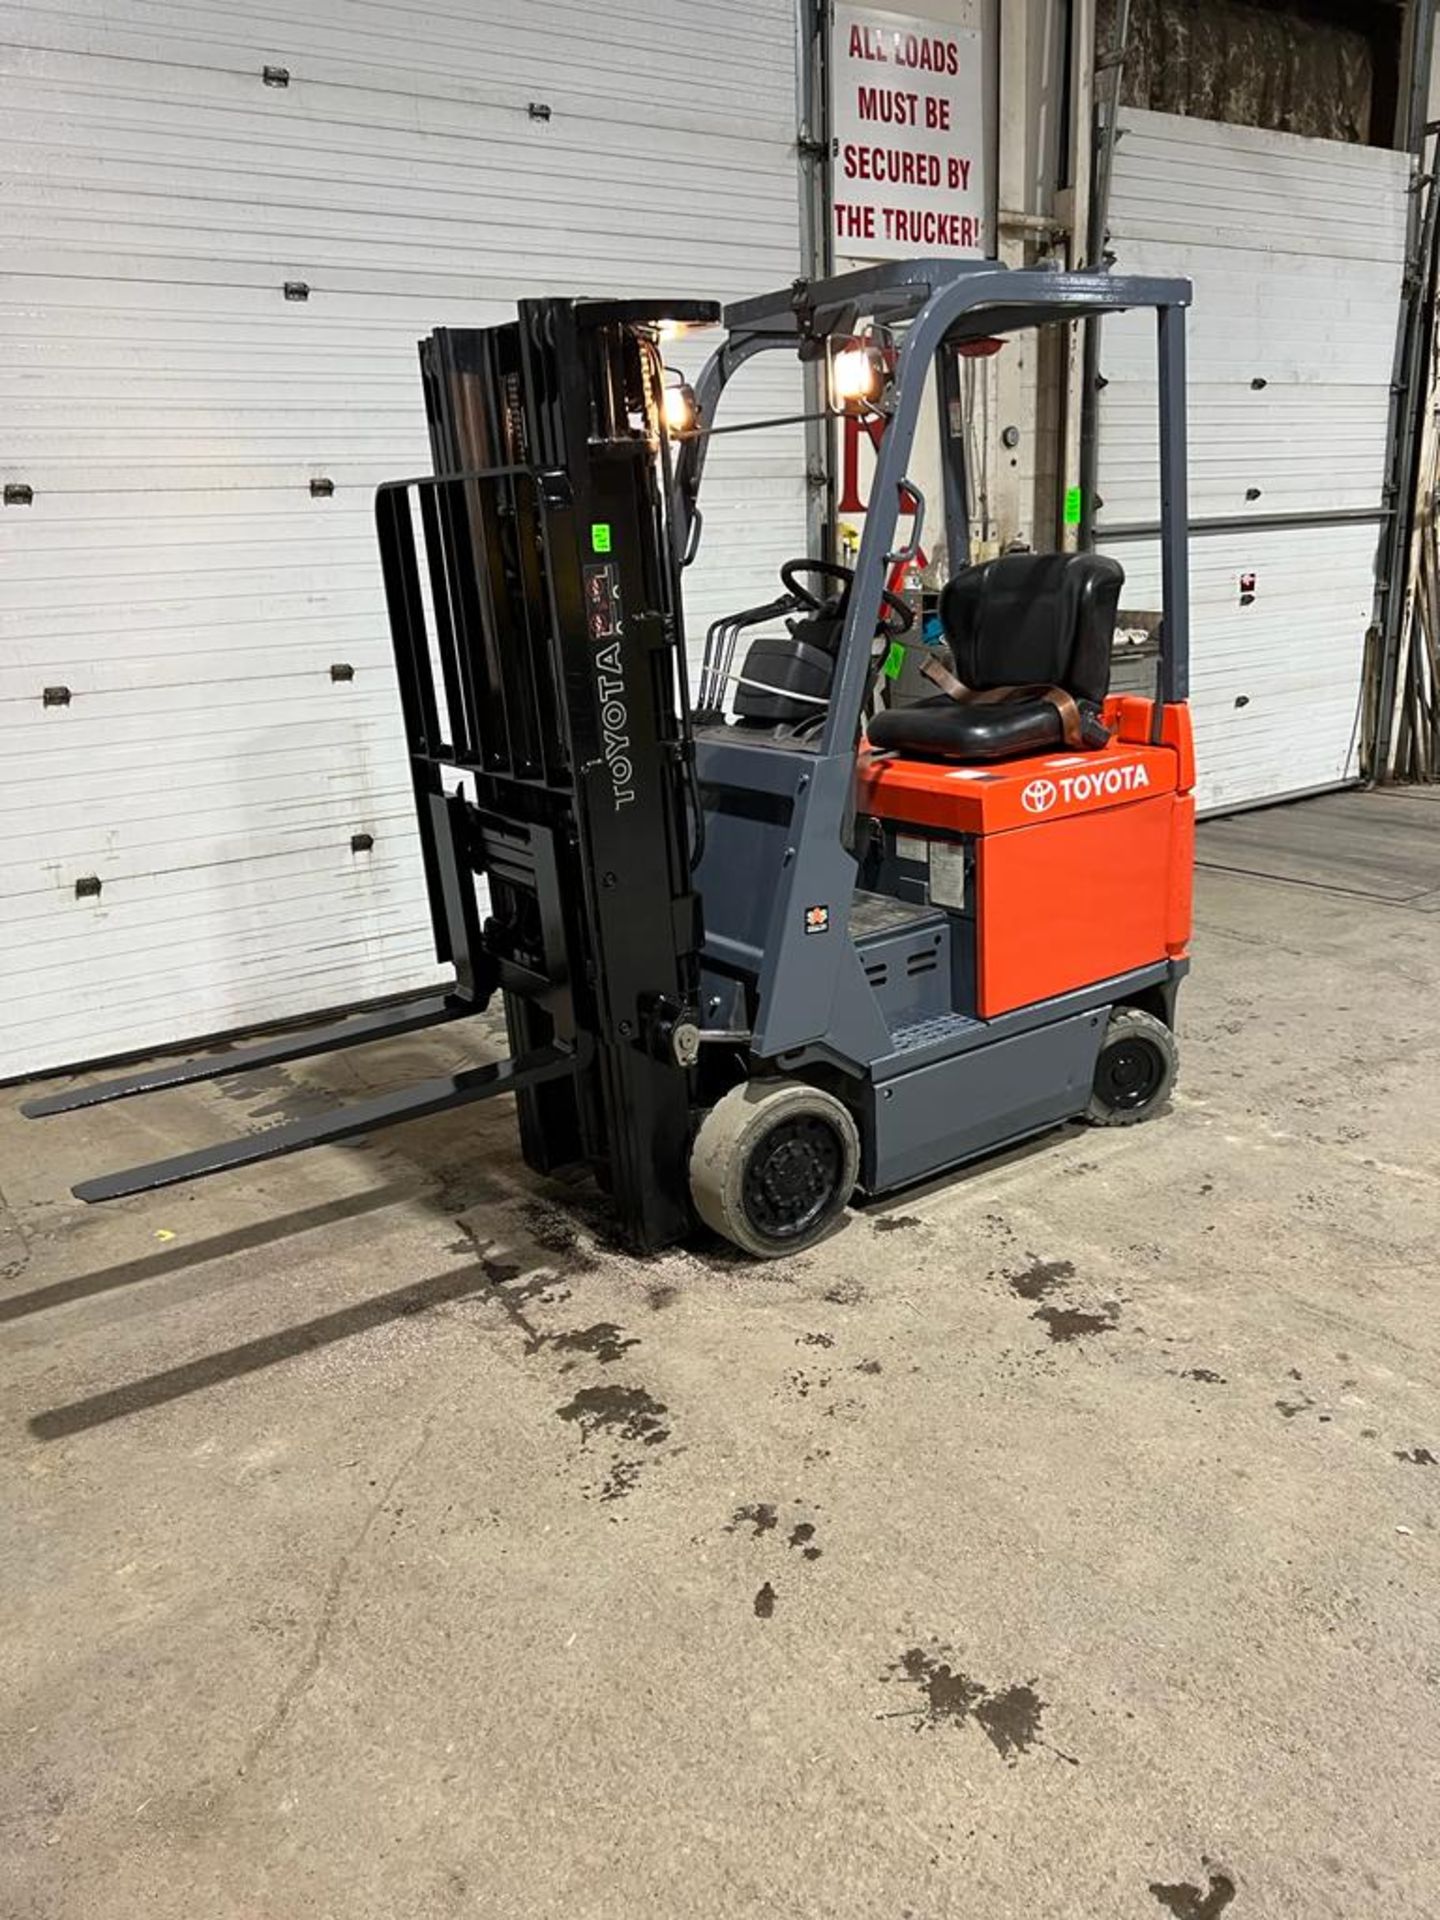 NICE 2016 Toyota 3,000lbs Capacity Forklift NEW 36V Battery with 3-stage mast - FREE CUSTOMS - Image 3 of 4